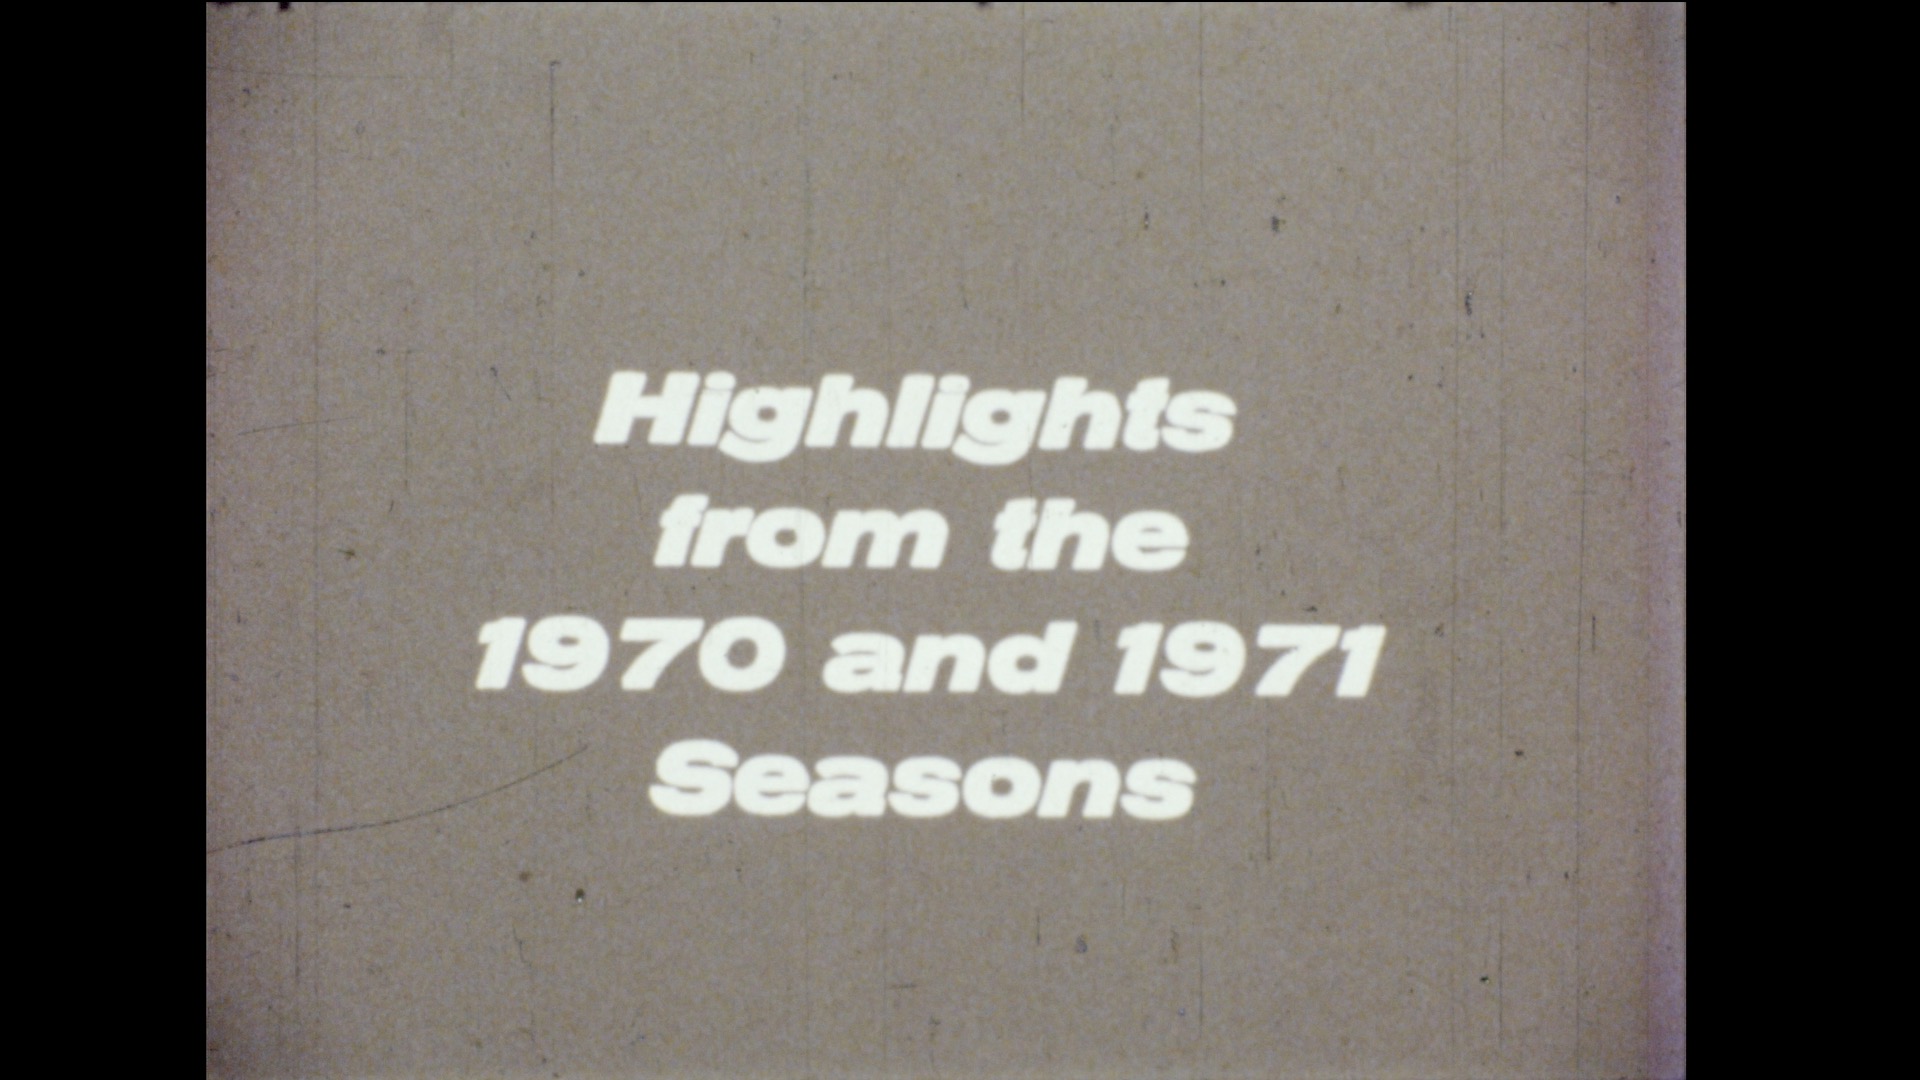 Spartan Marching Band: Highlights of the 1970-1971 Seasons